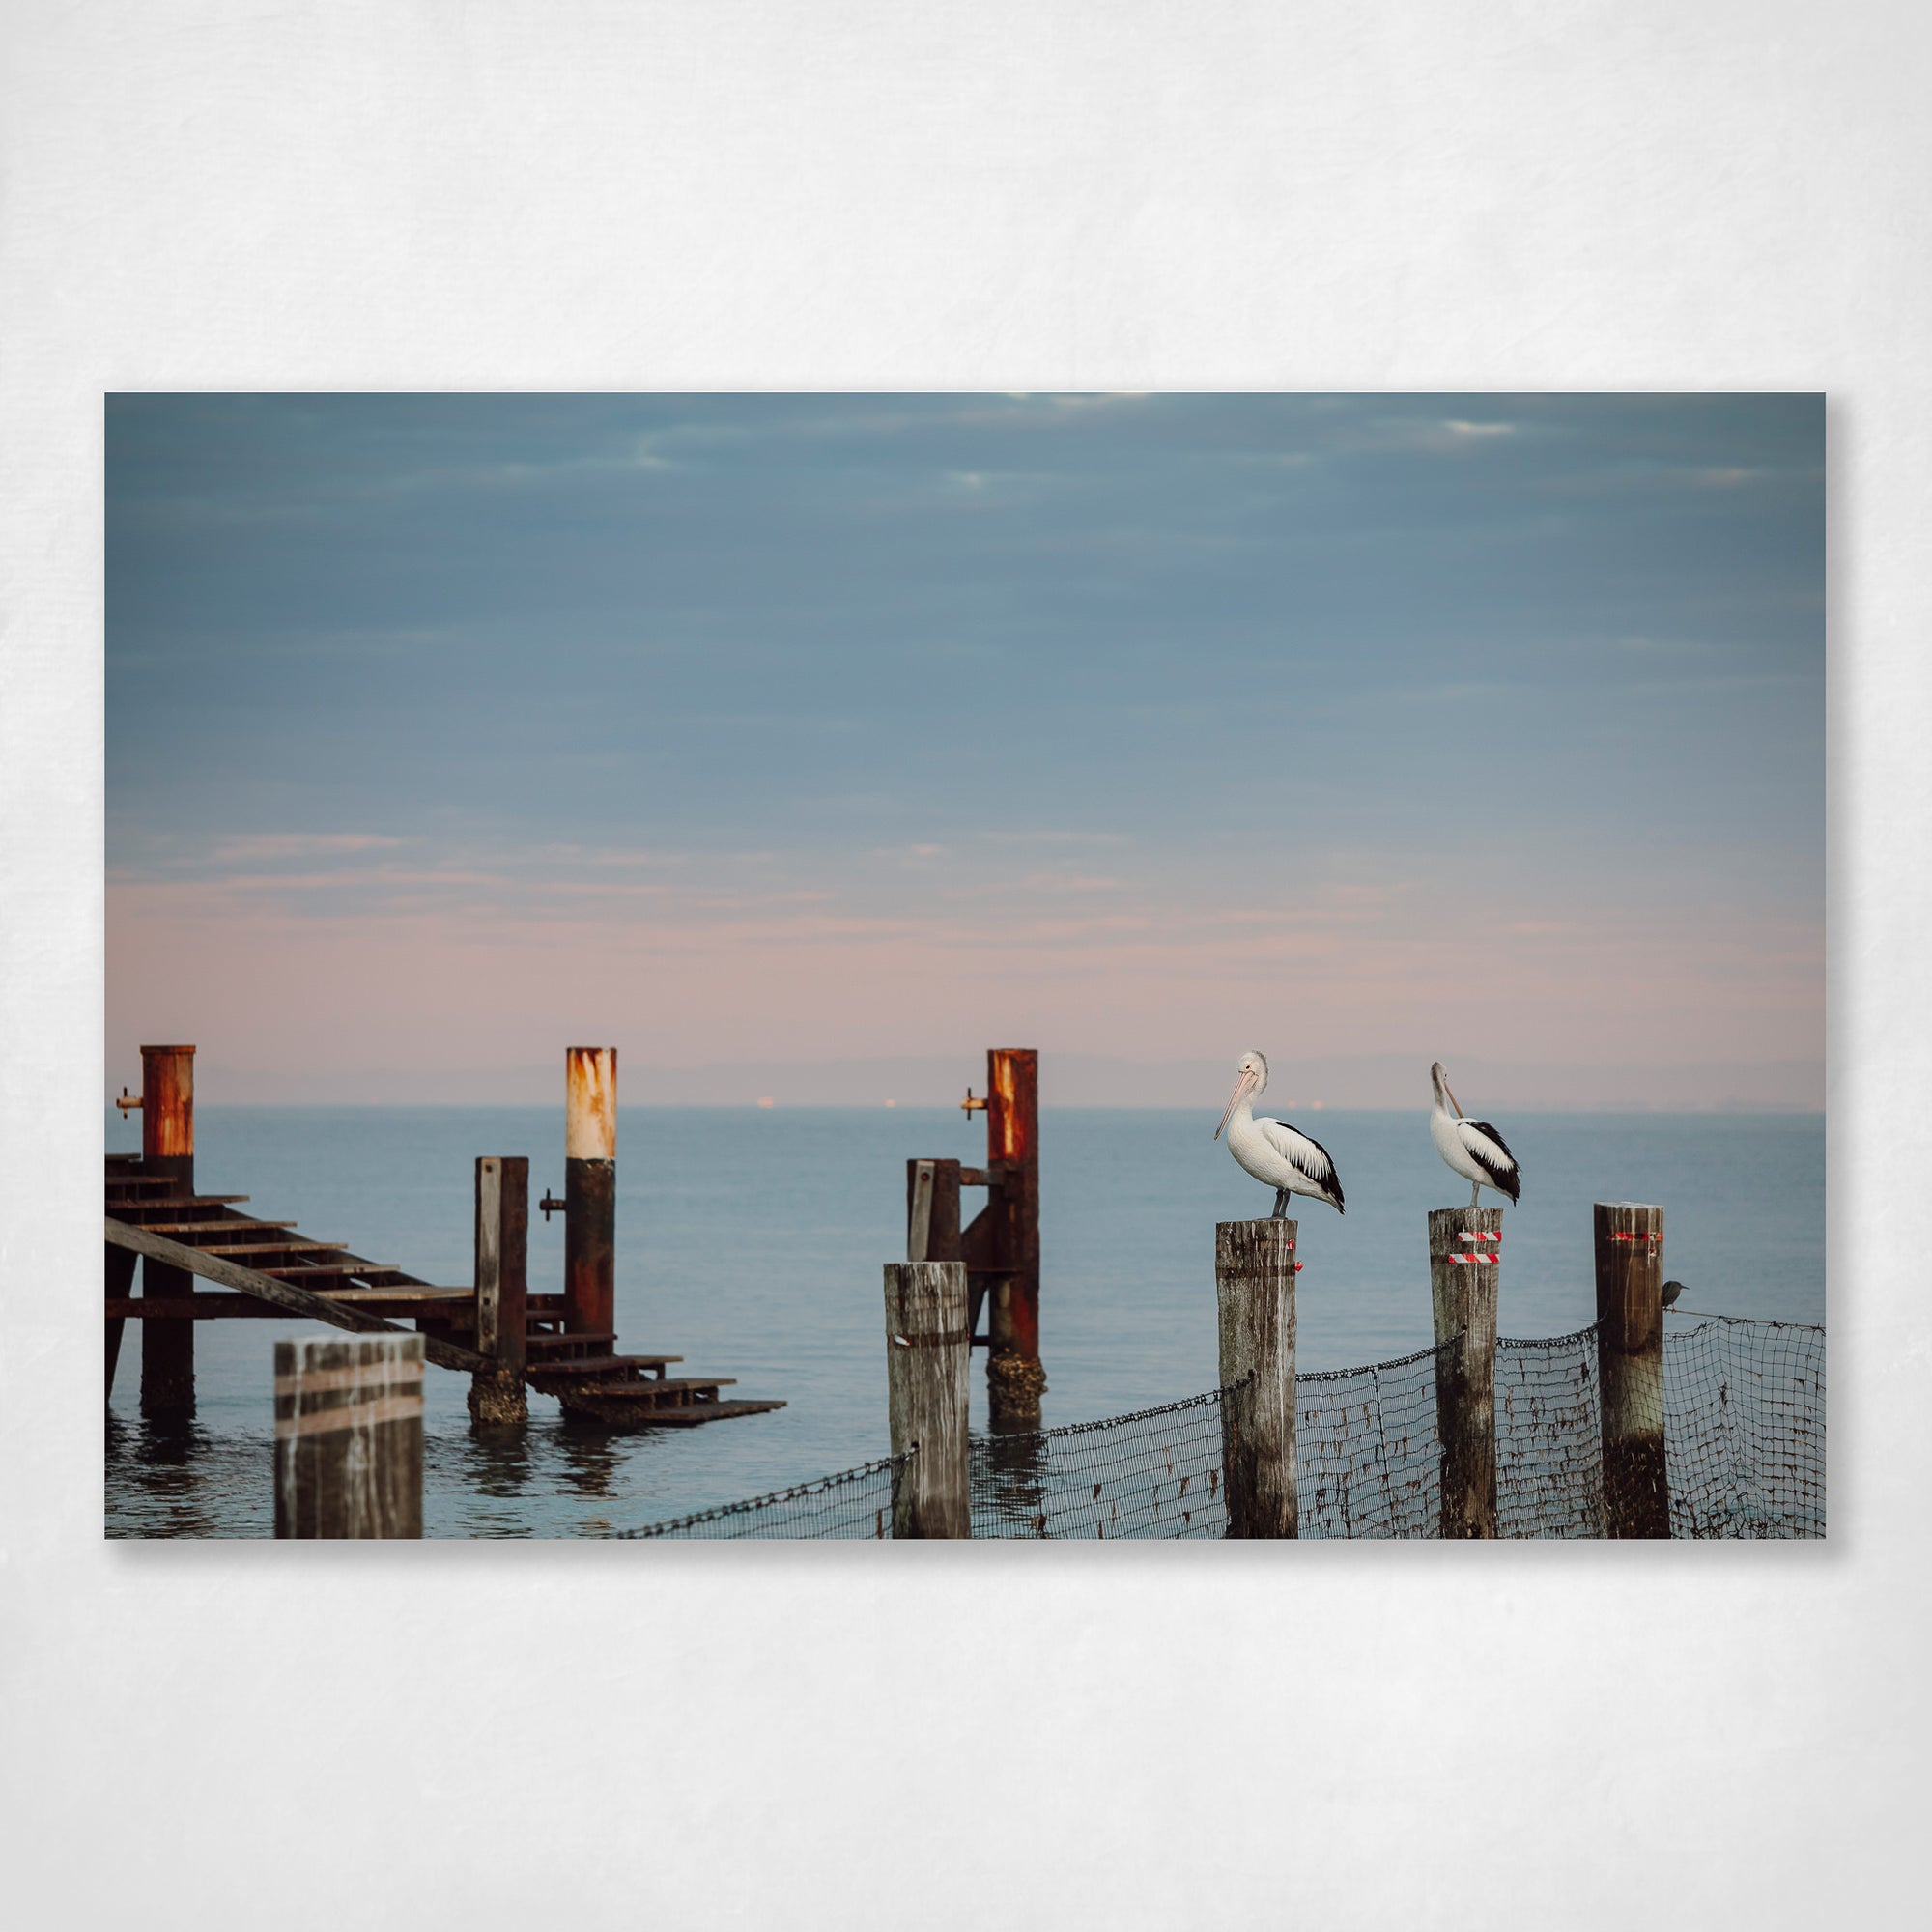 Pelicans at the Amity Jetty